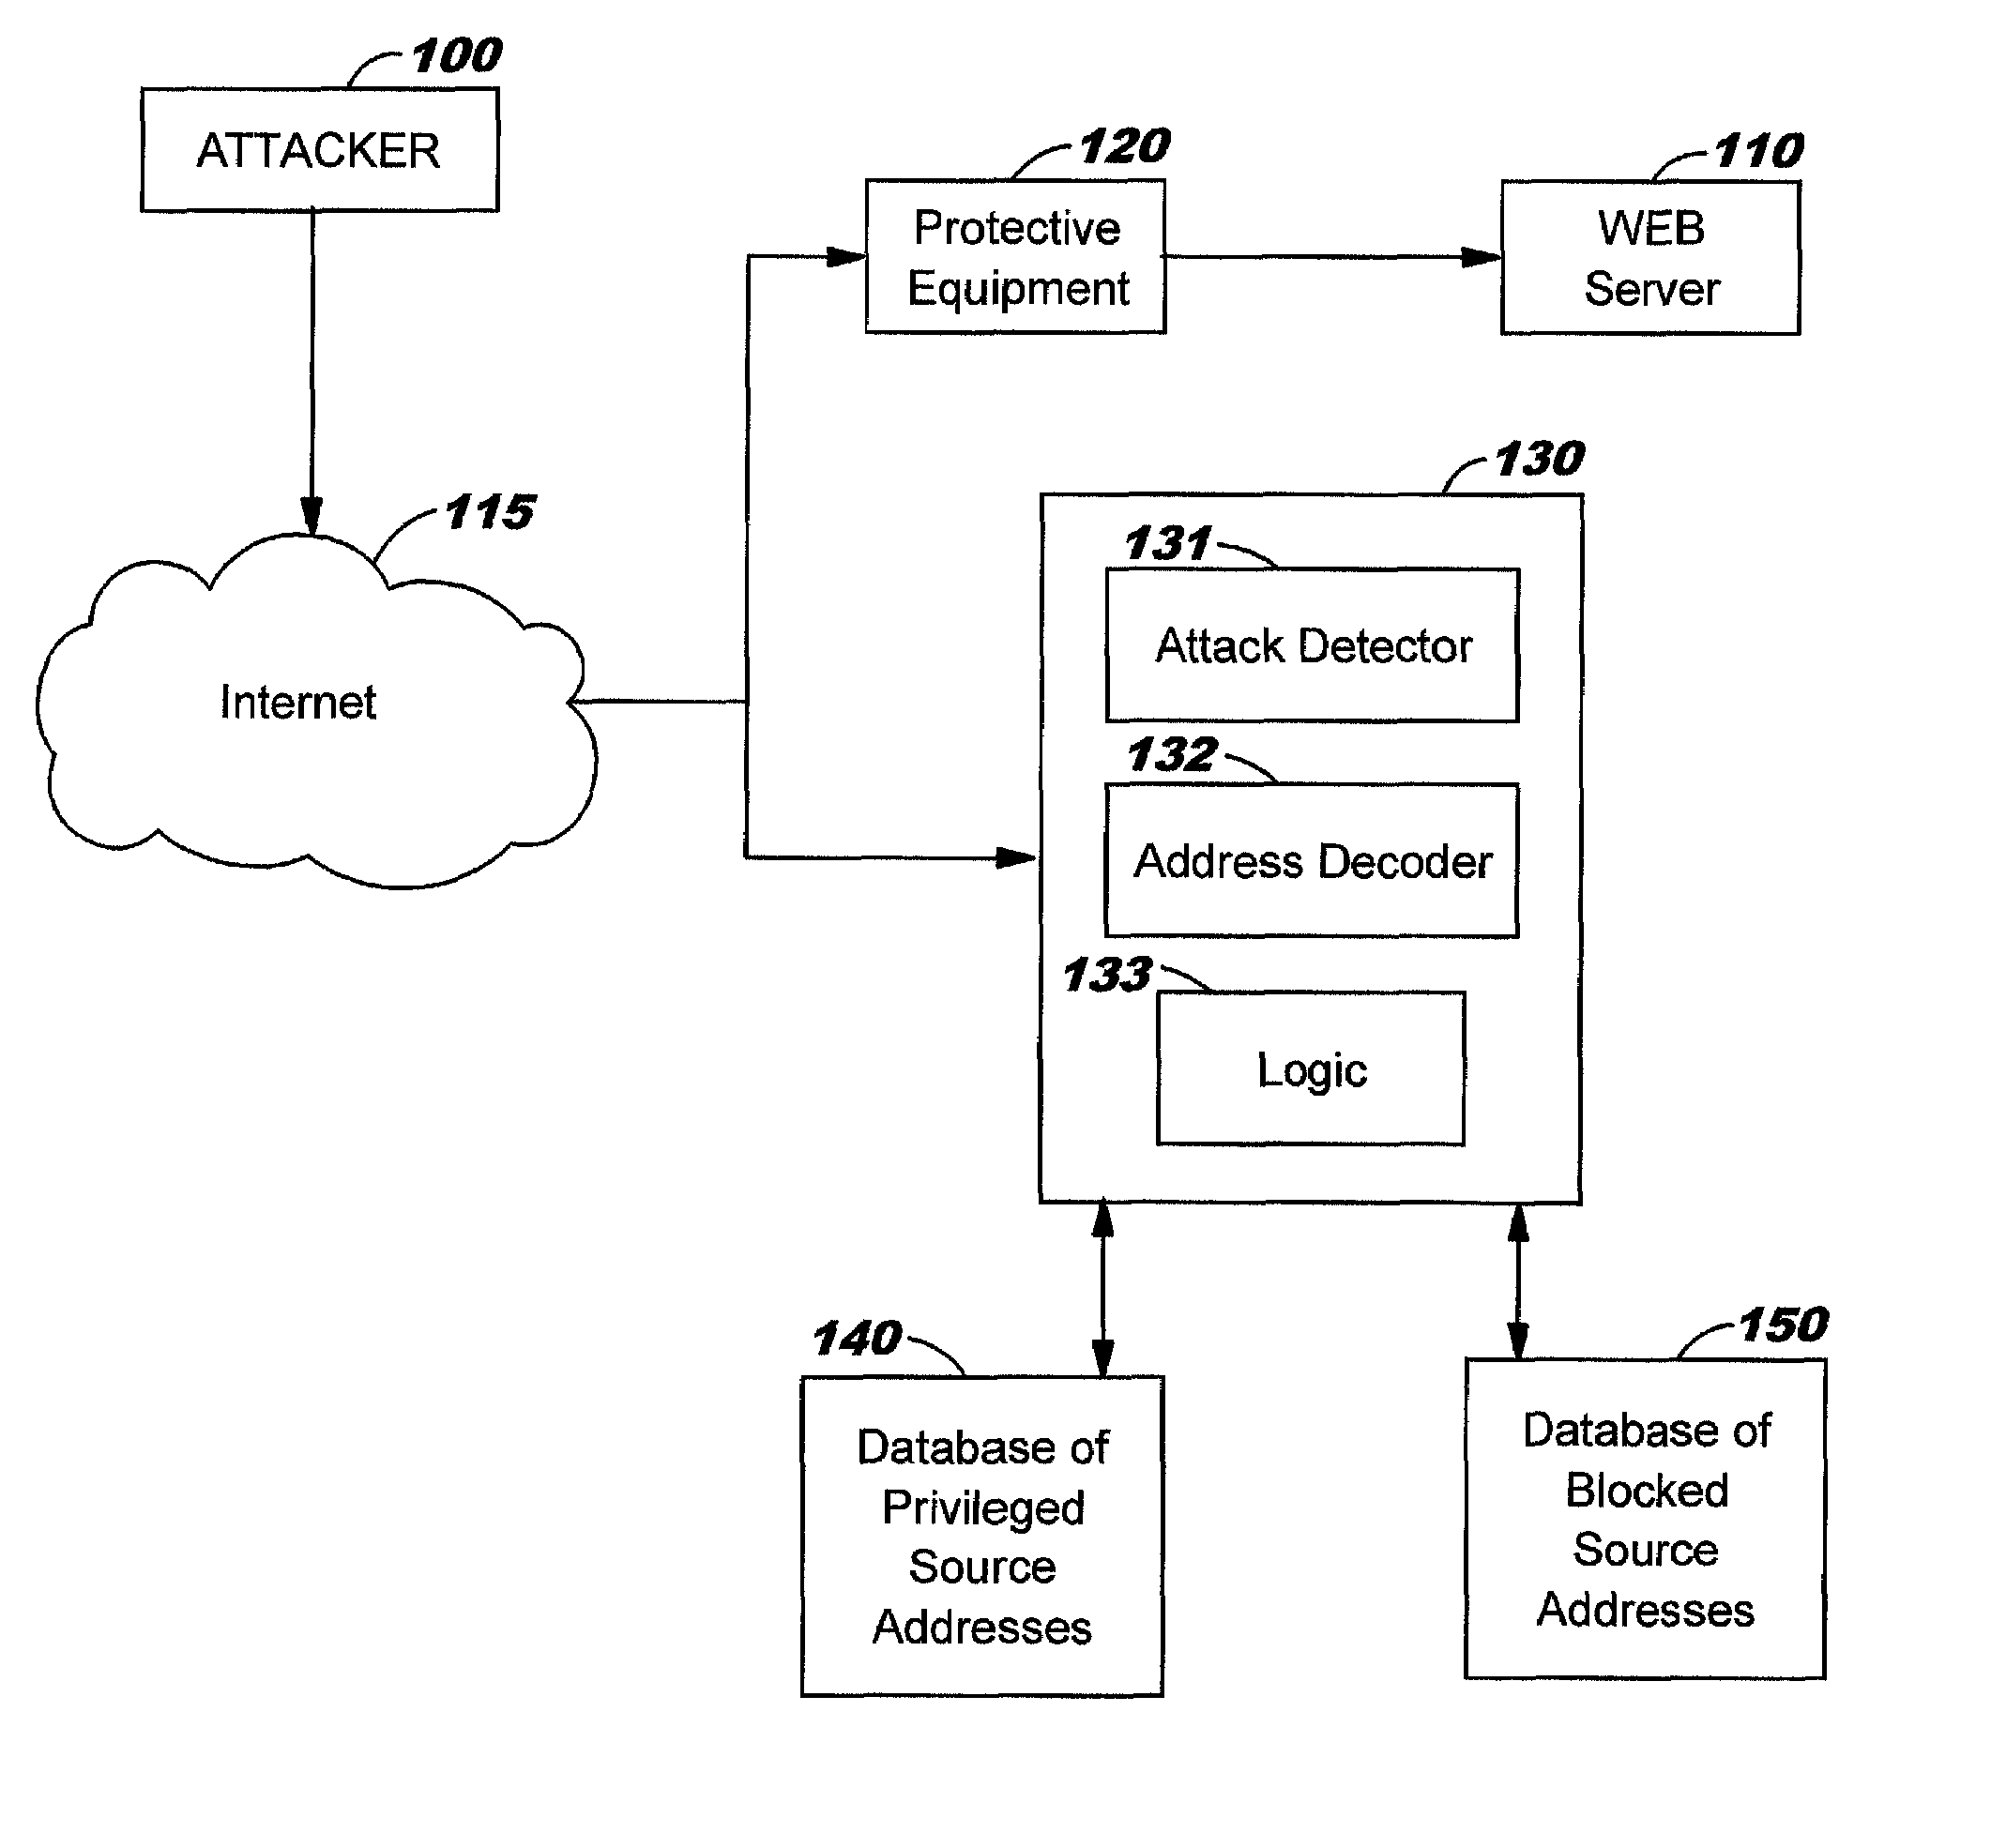 Method and apparatus for protecting a web server against vandals attacks without restricting legitimate access